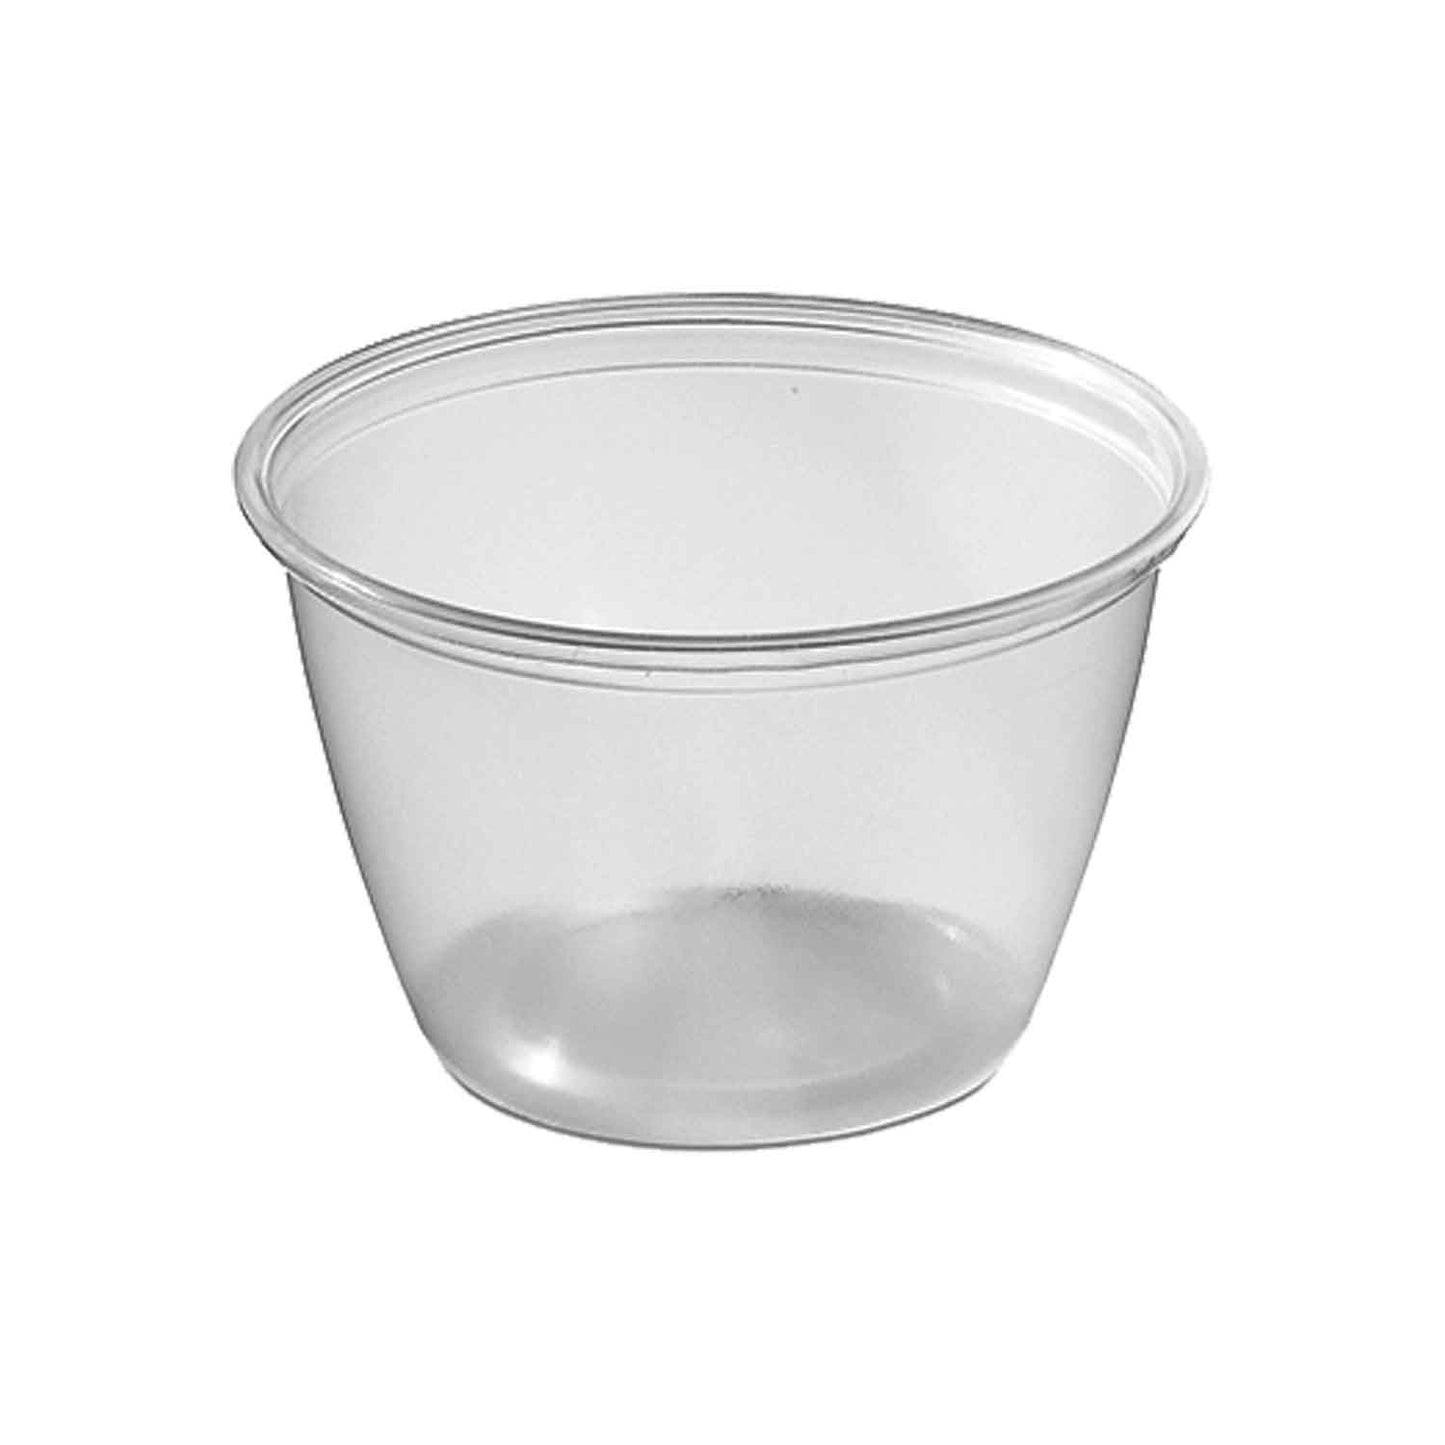 PORTION CUP CLEAR 3.25 OZ 125